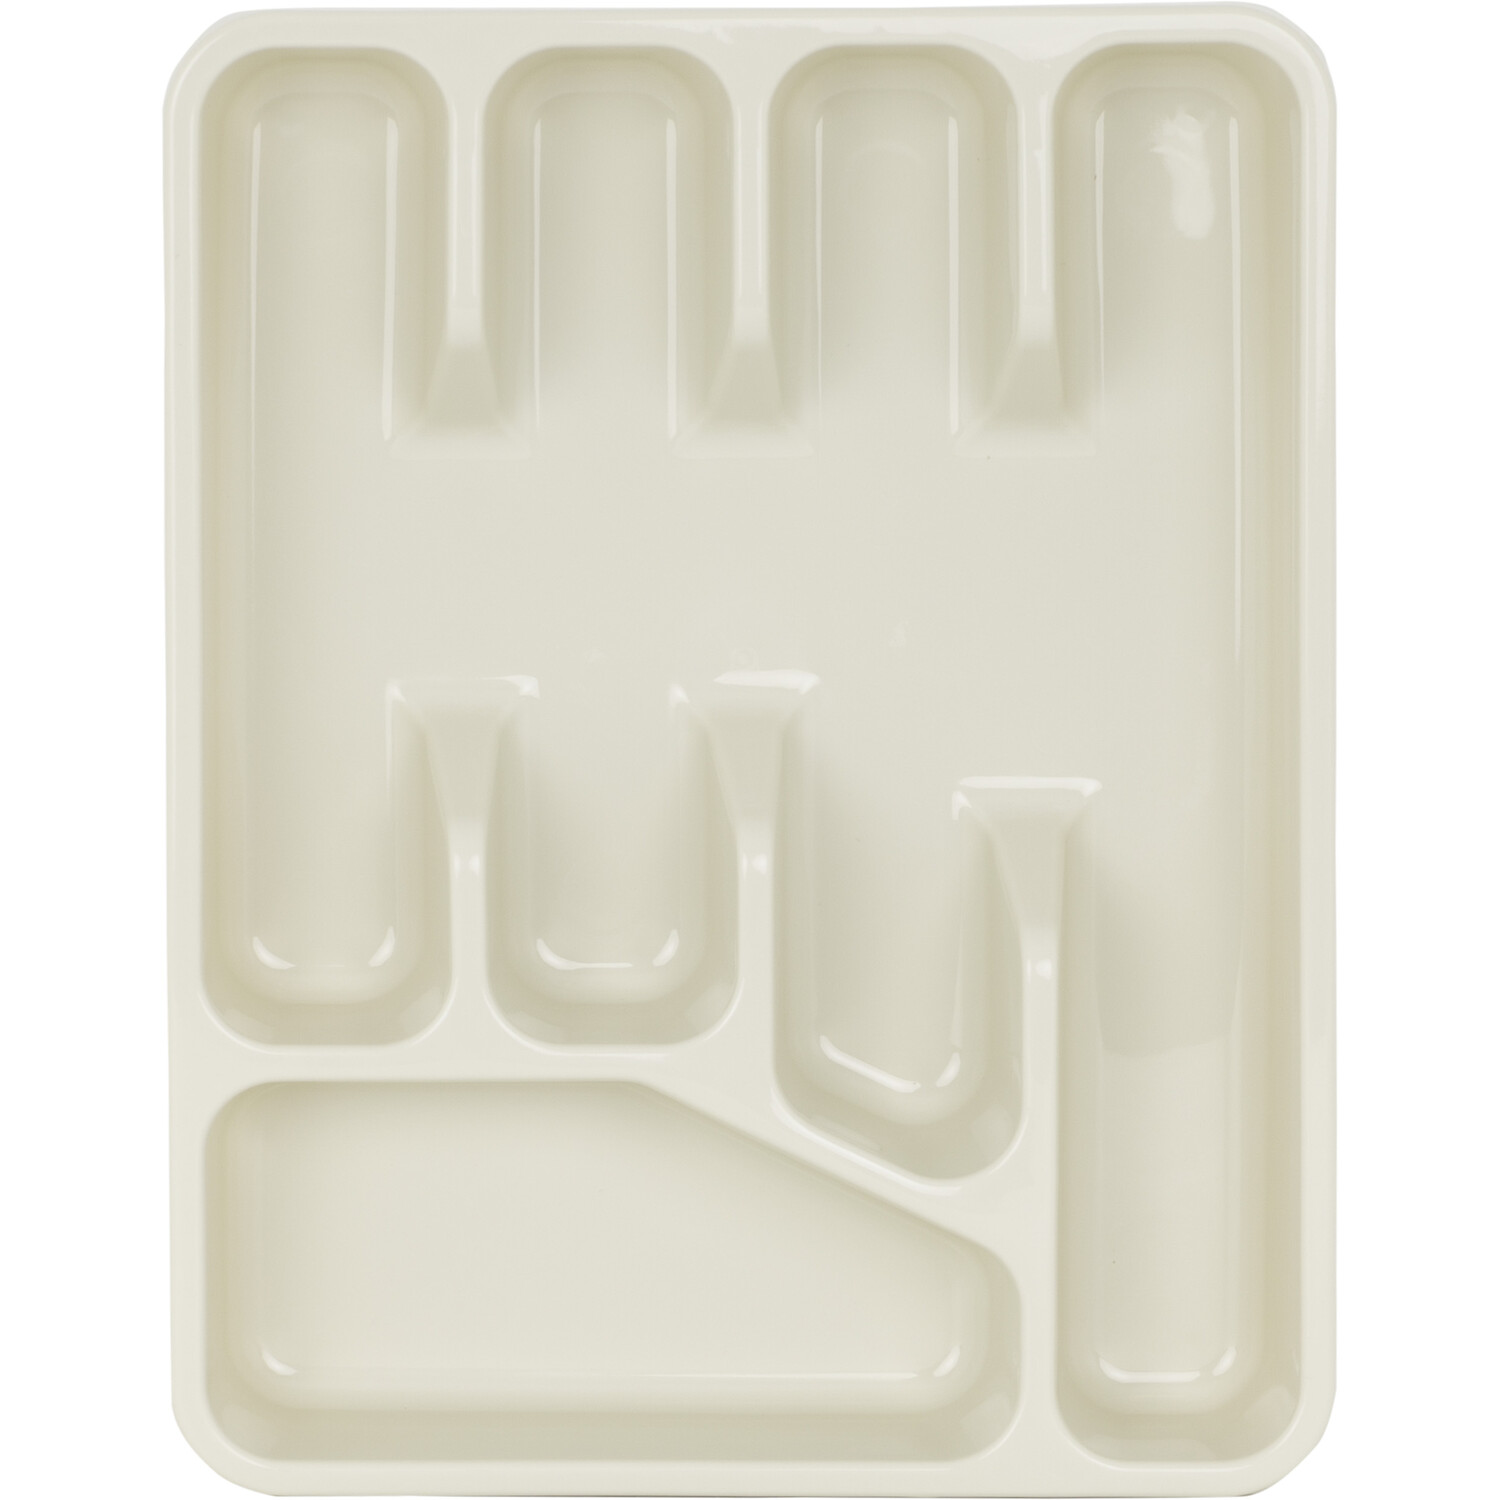 Everyday Cutlery Tray - Oyster White Image